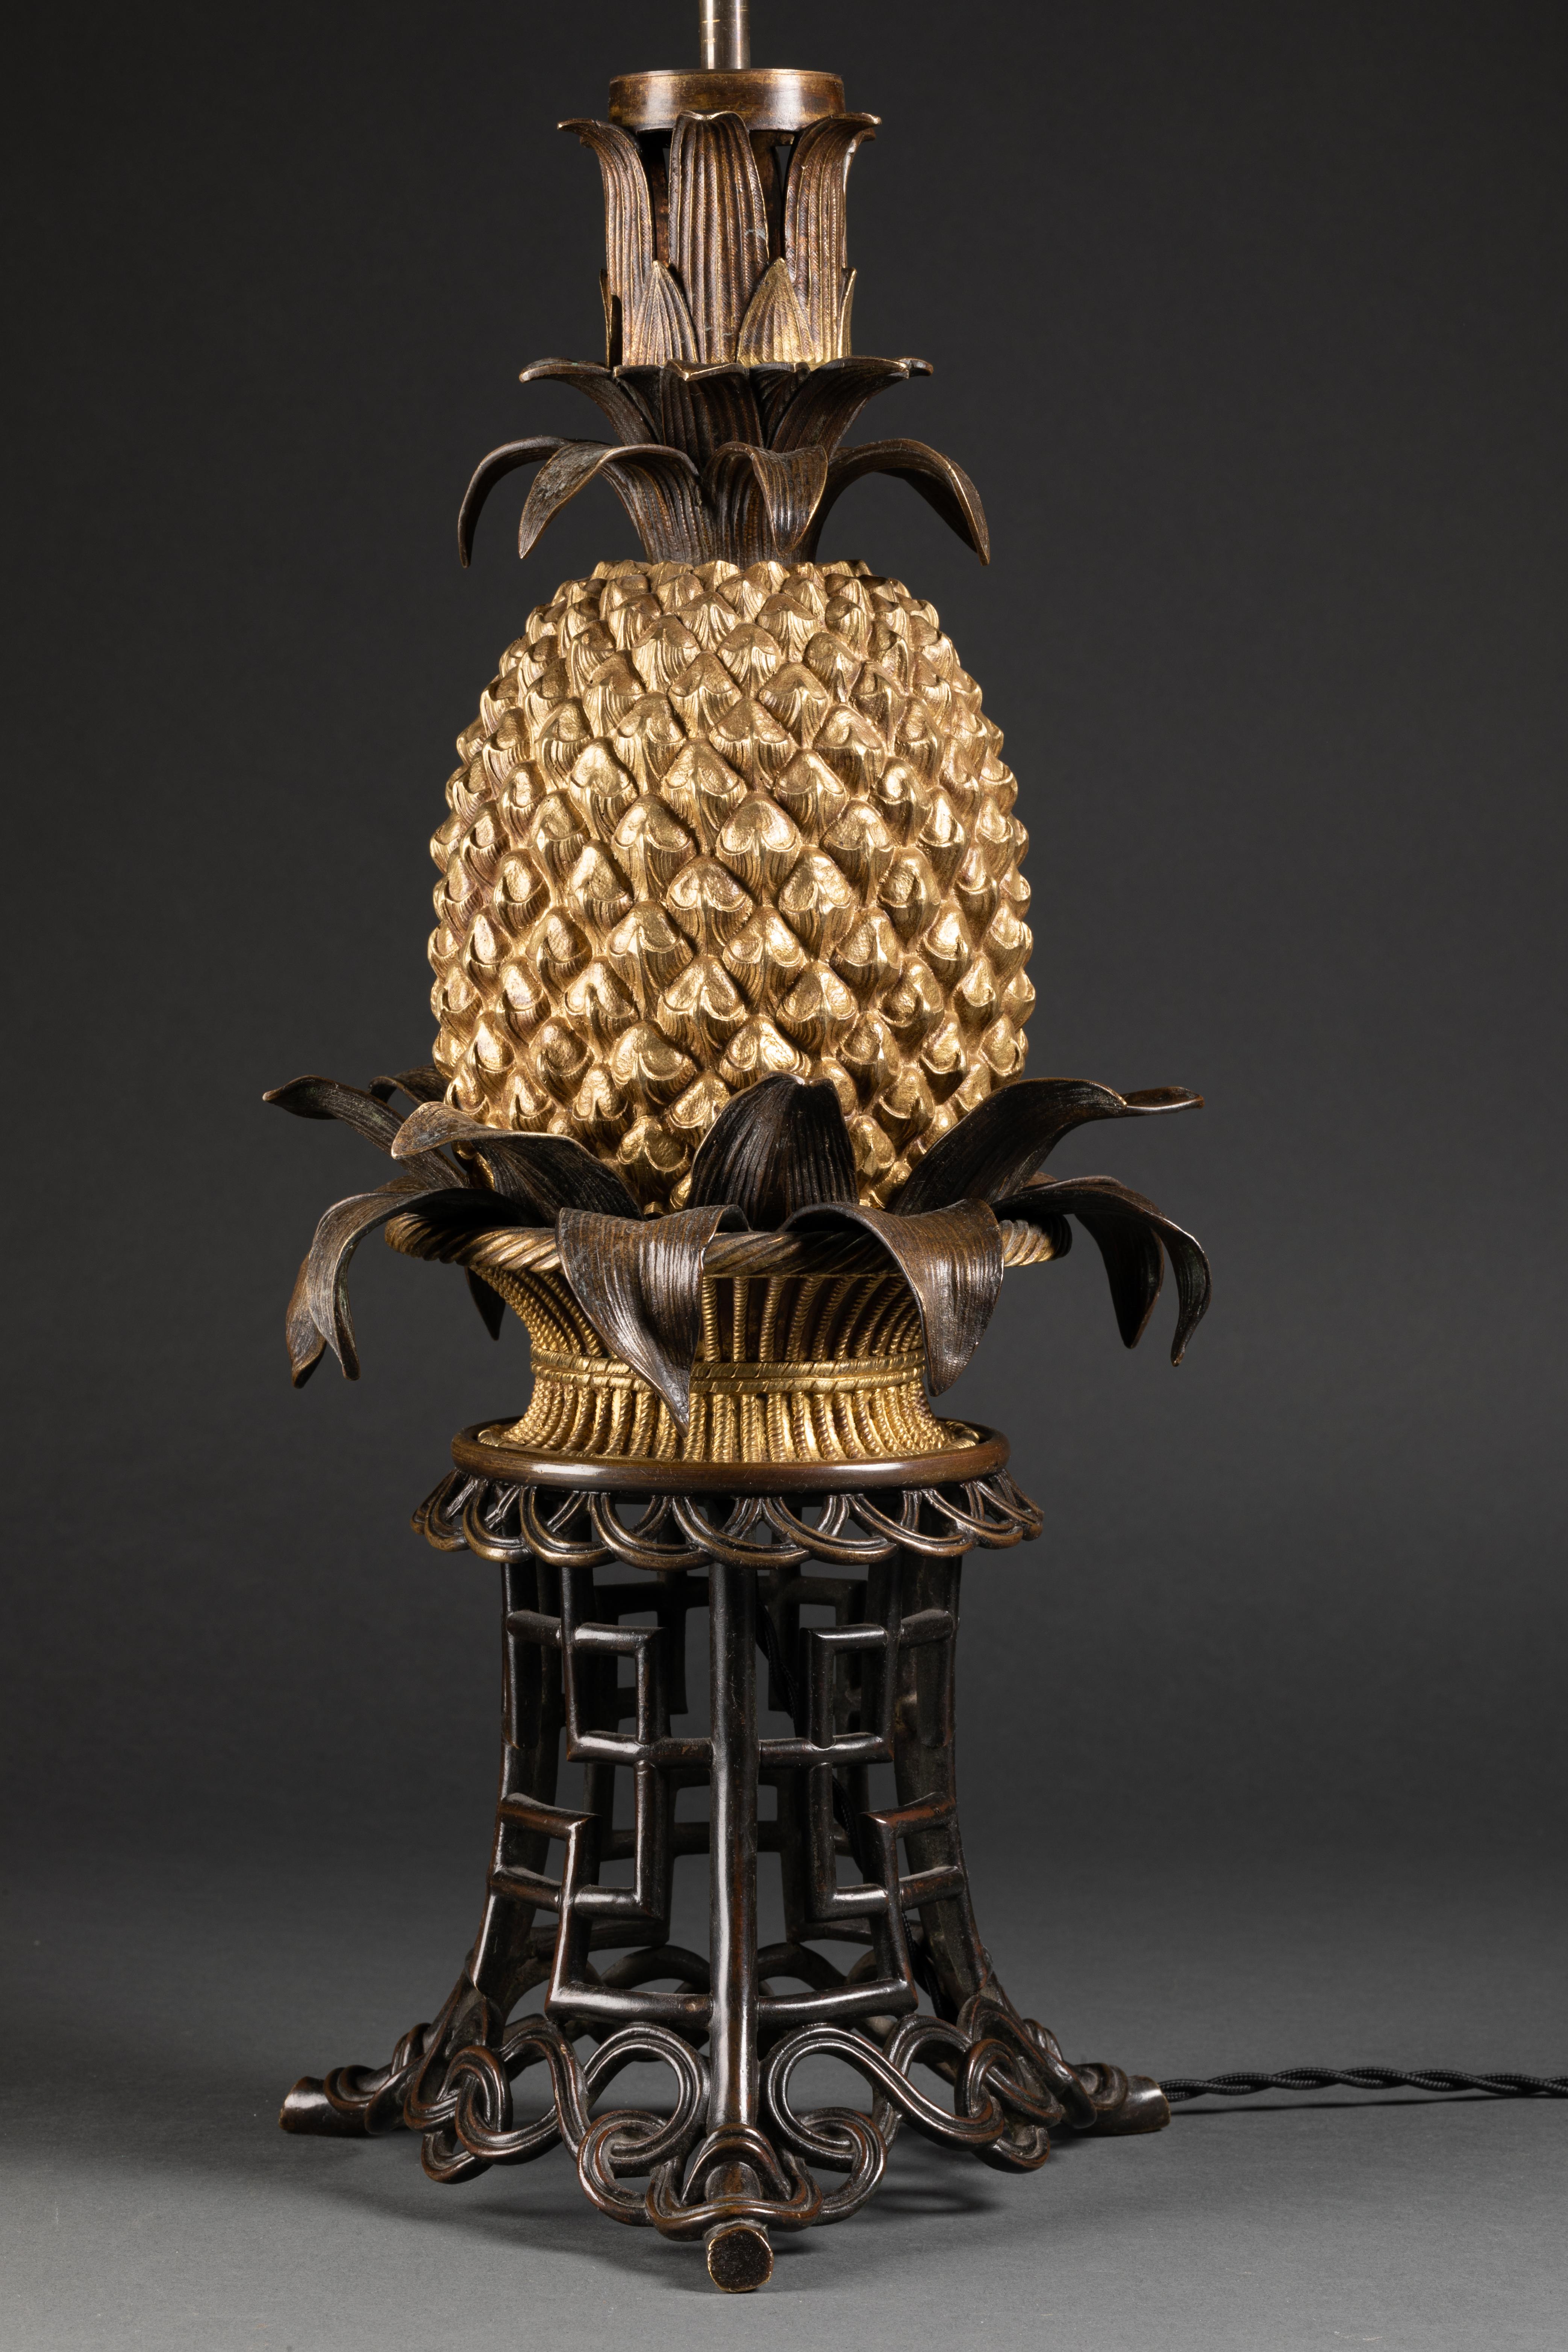 European Very Rare Pineapple Lamp on a Wicker Basket with a Bronze Chinoiserie Base